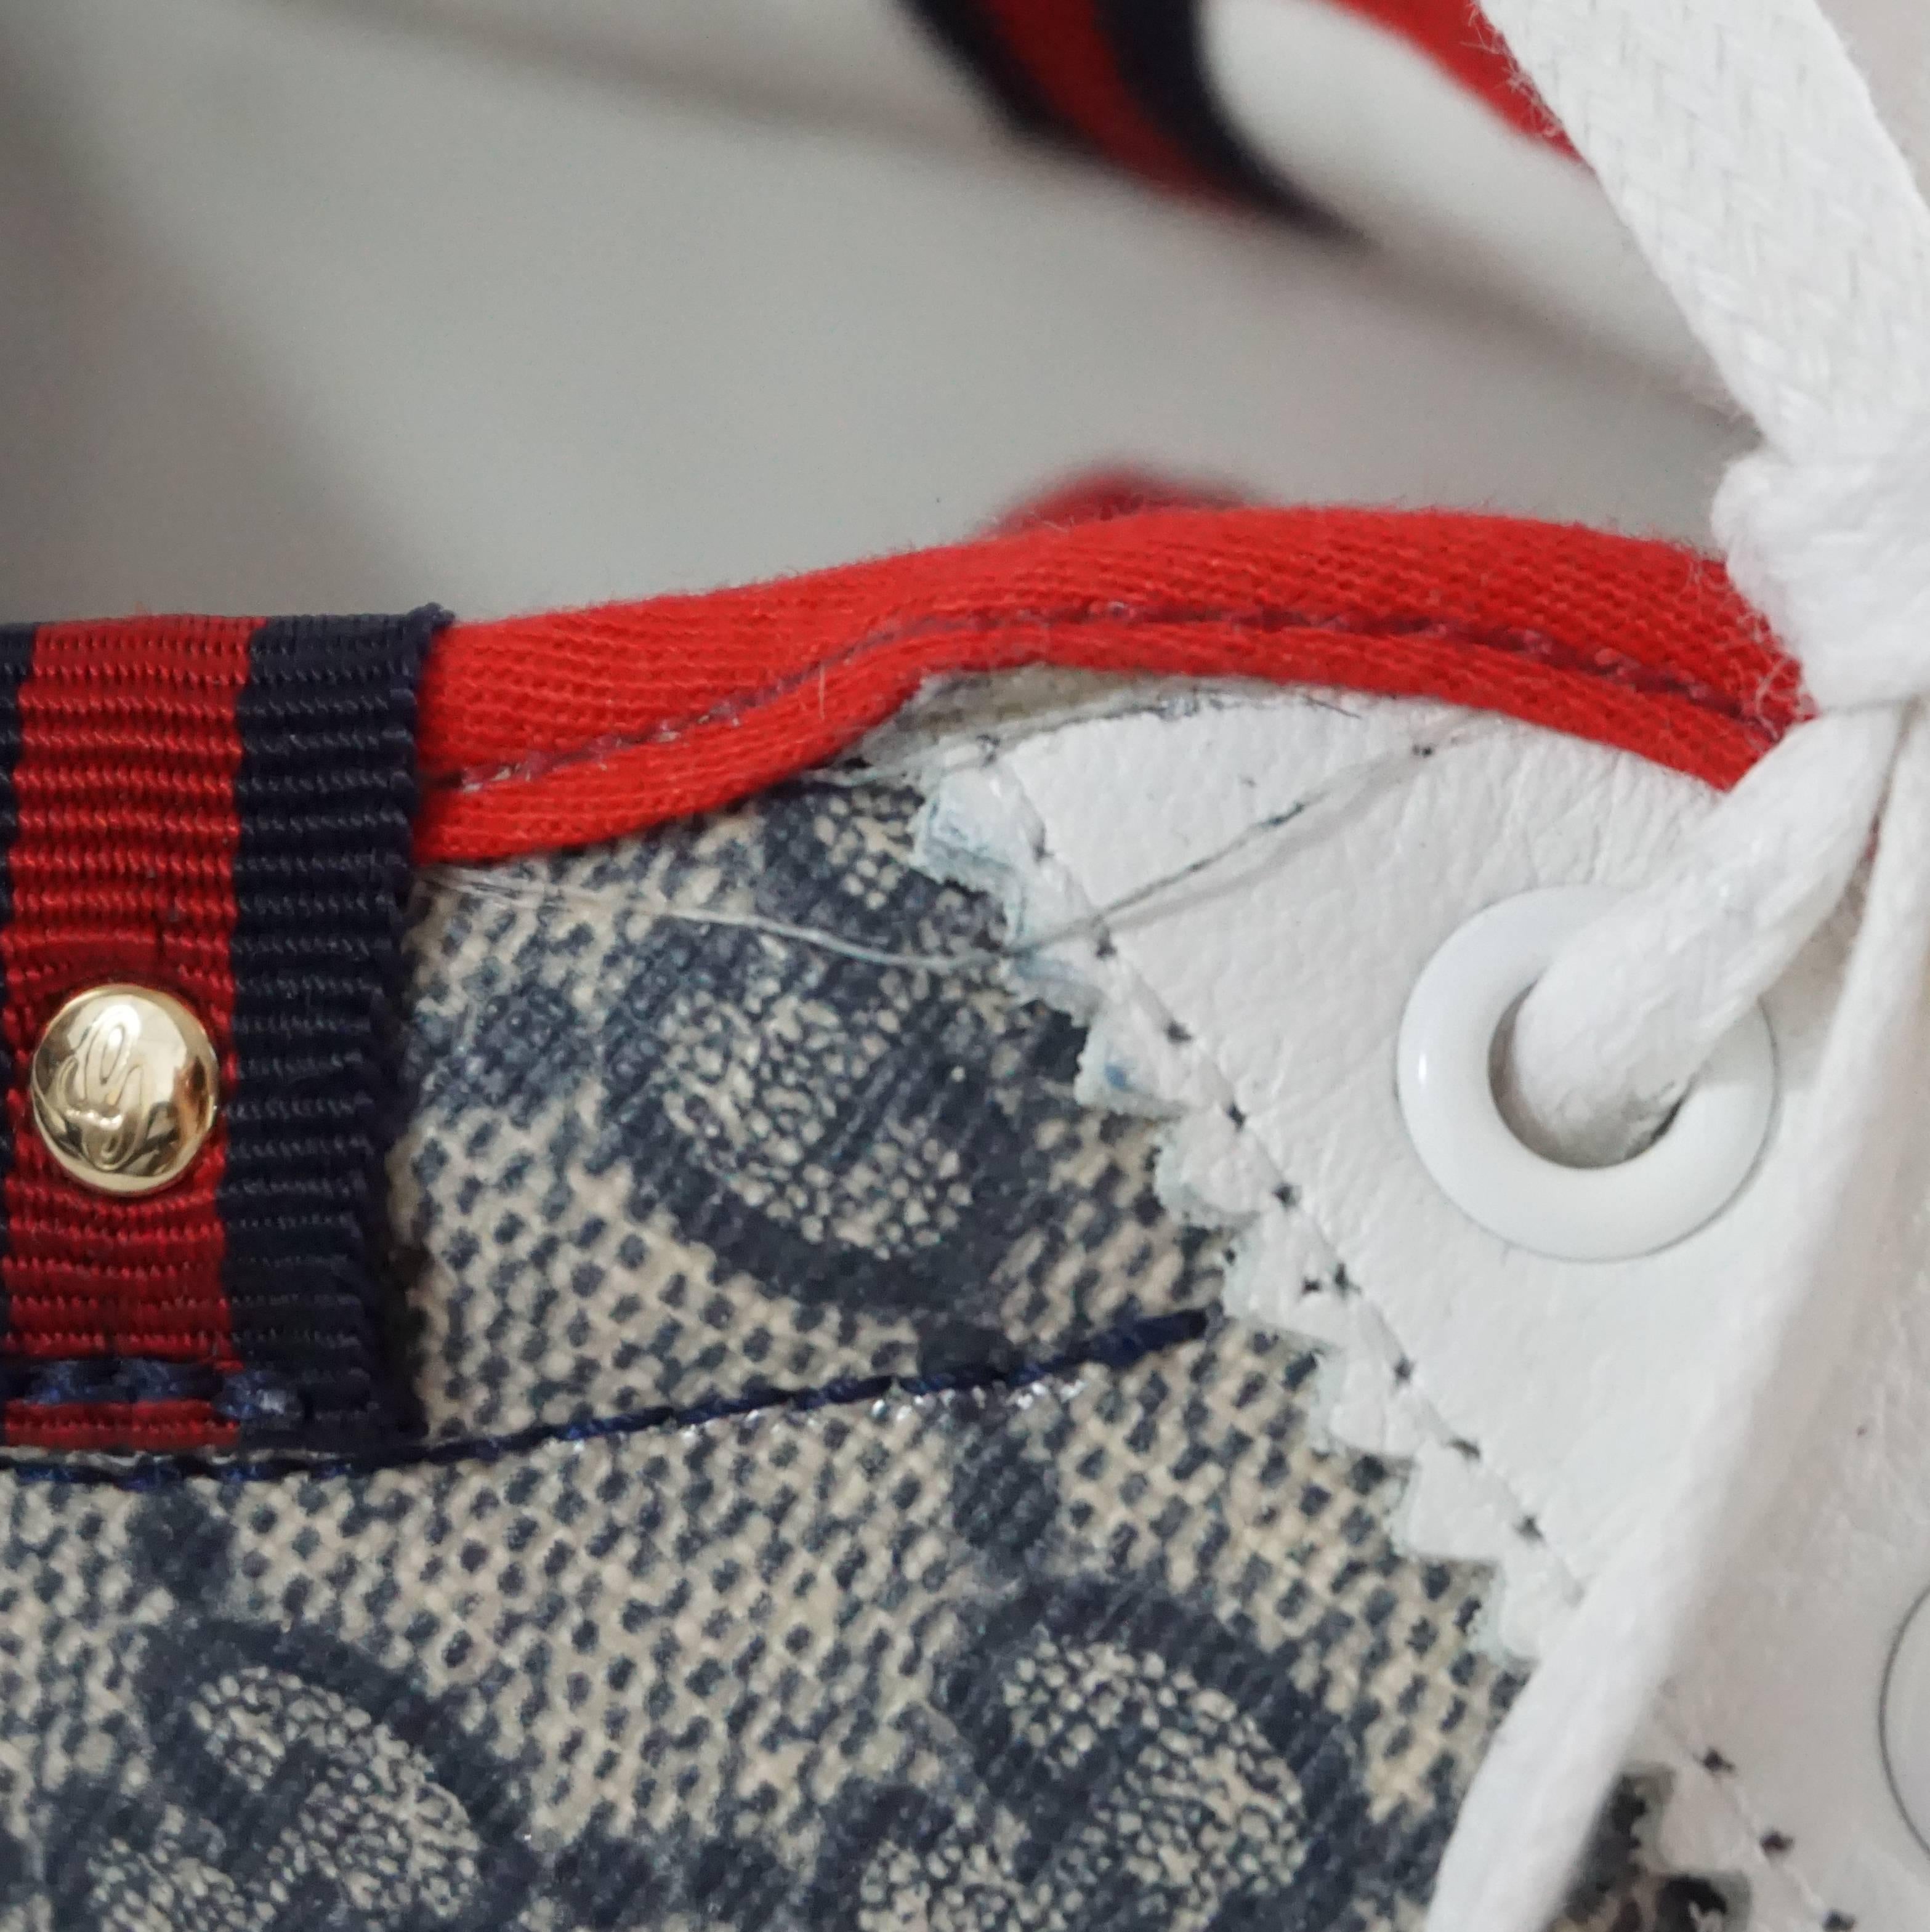 Gucci Red, White, and Blue Monogram Sneakers - 39 1